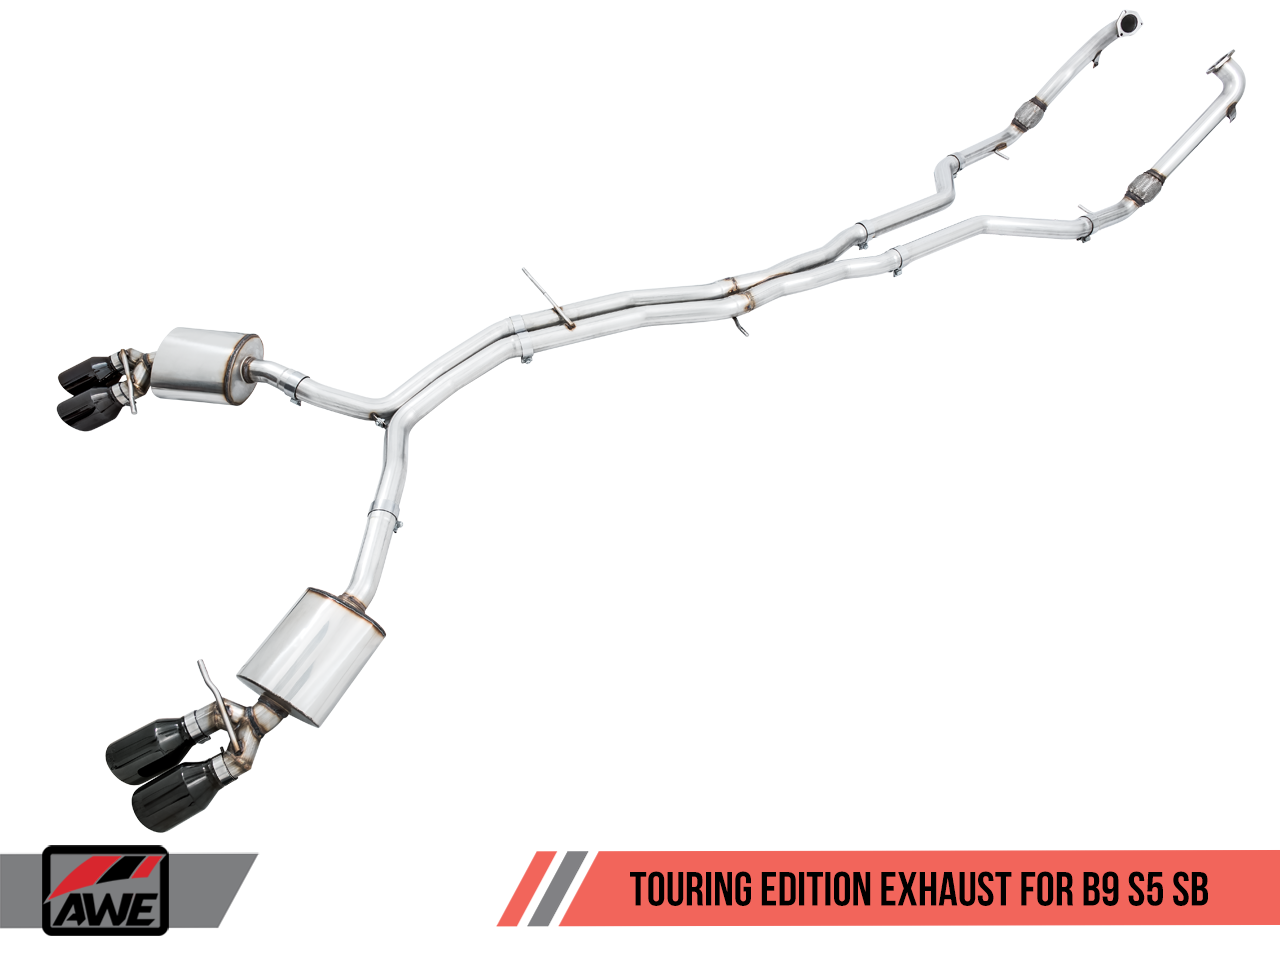 AWE SwitchPath™ Exhaust for Audi B9 S5 Sportback - Non-Resonated - Motorsports LA